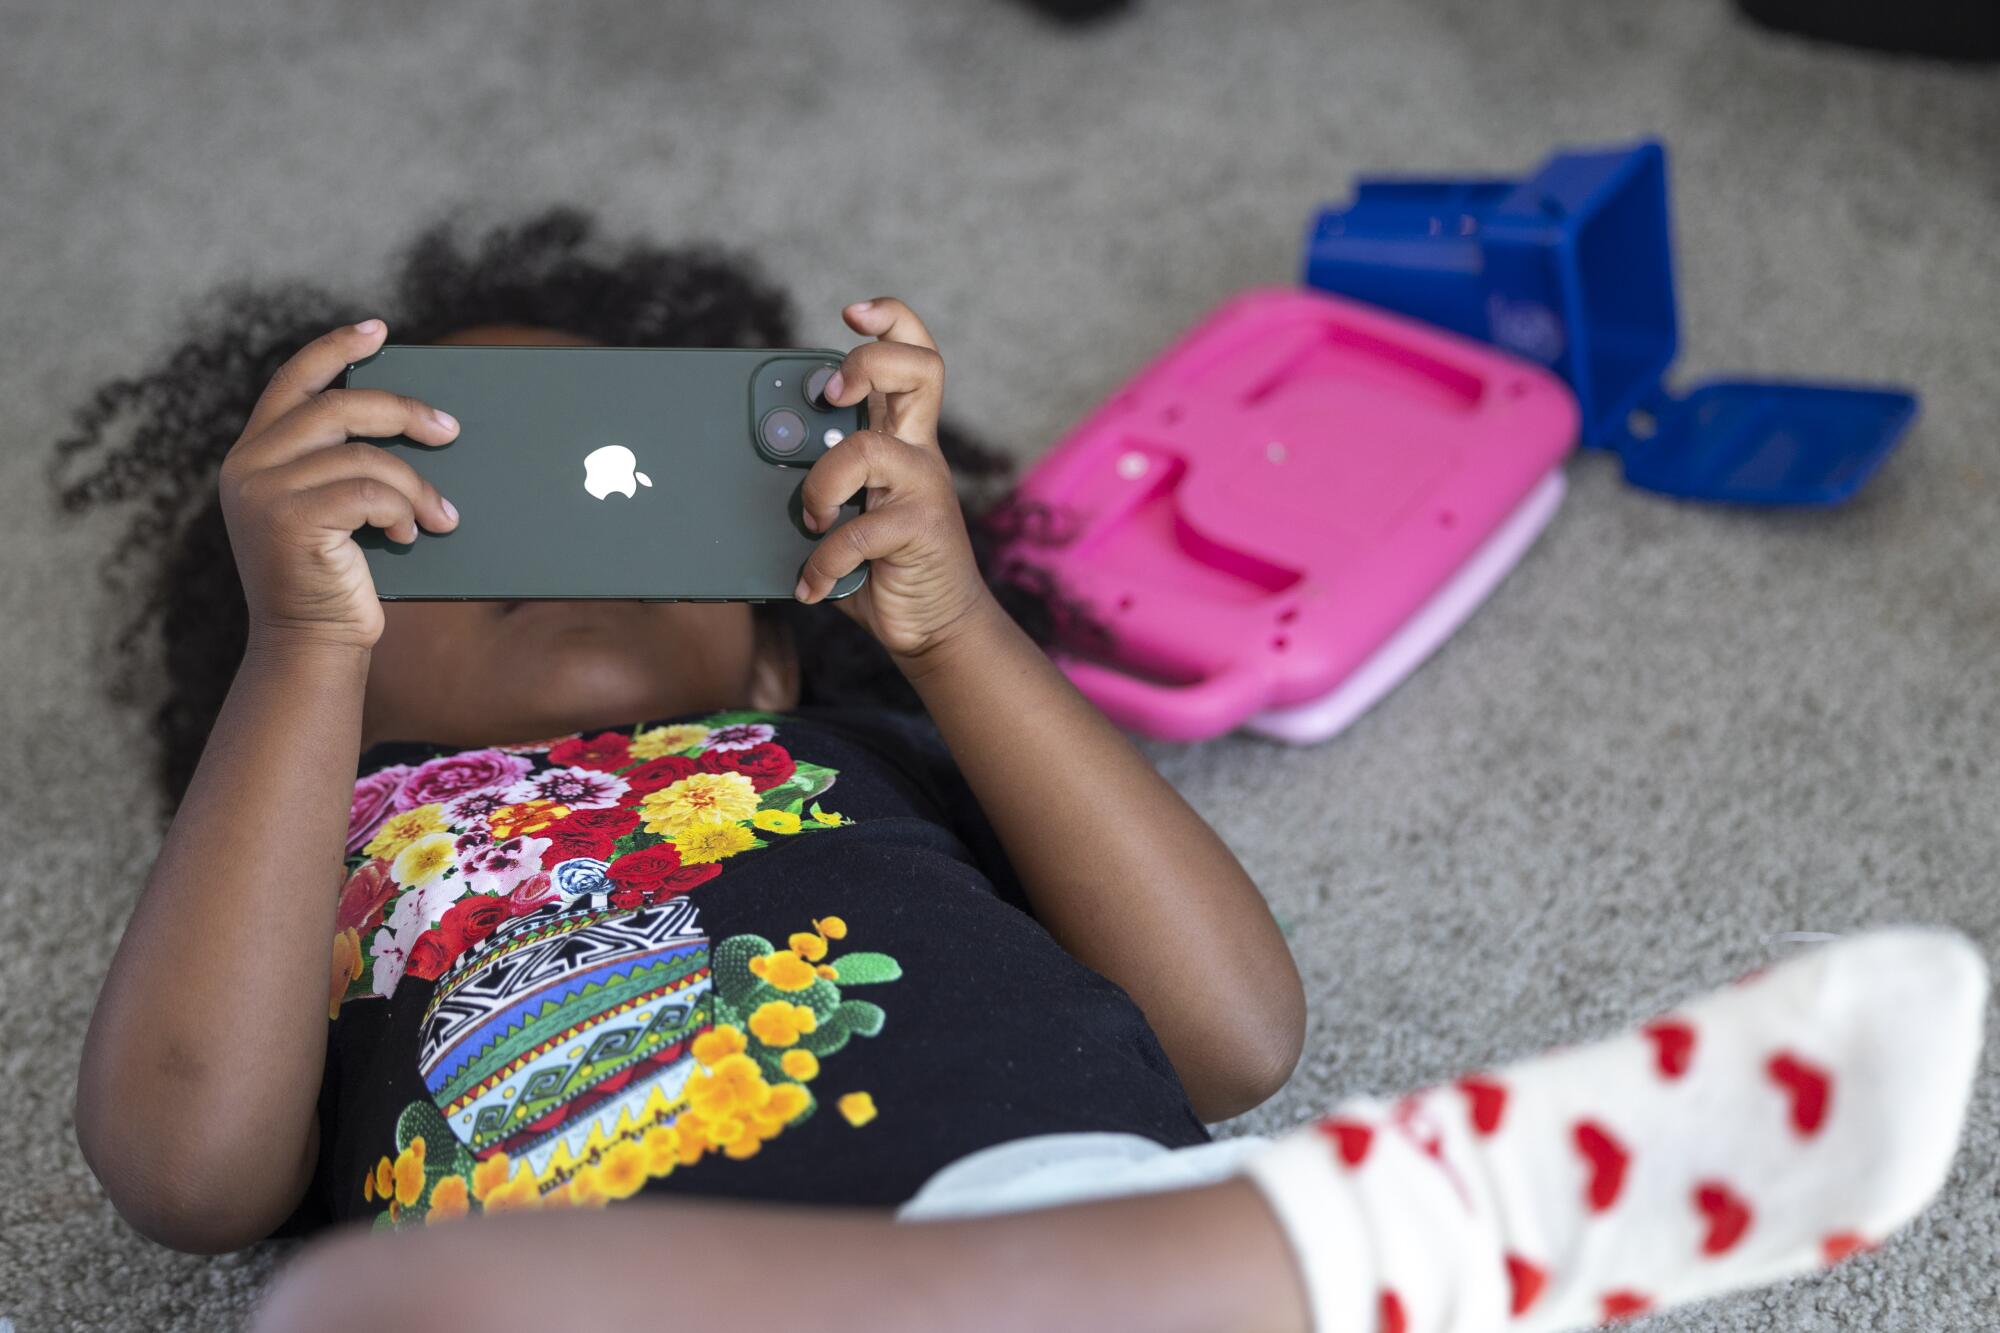 Maya Valree's 3-year old daughter watches an iPhone while her mother works.